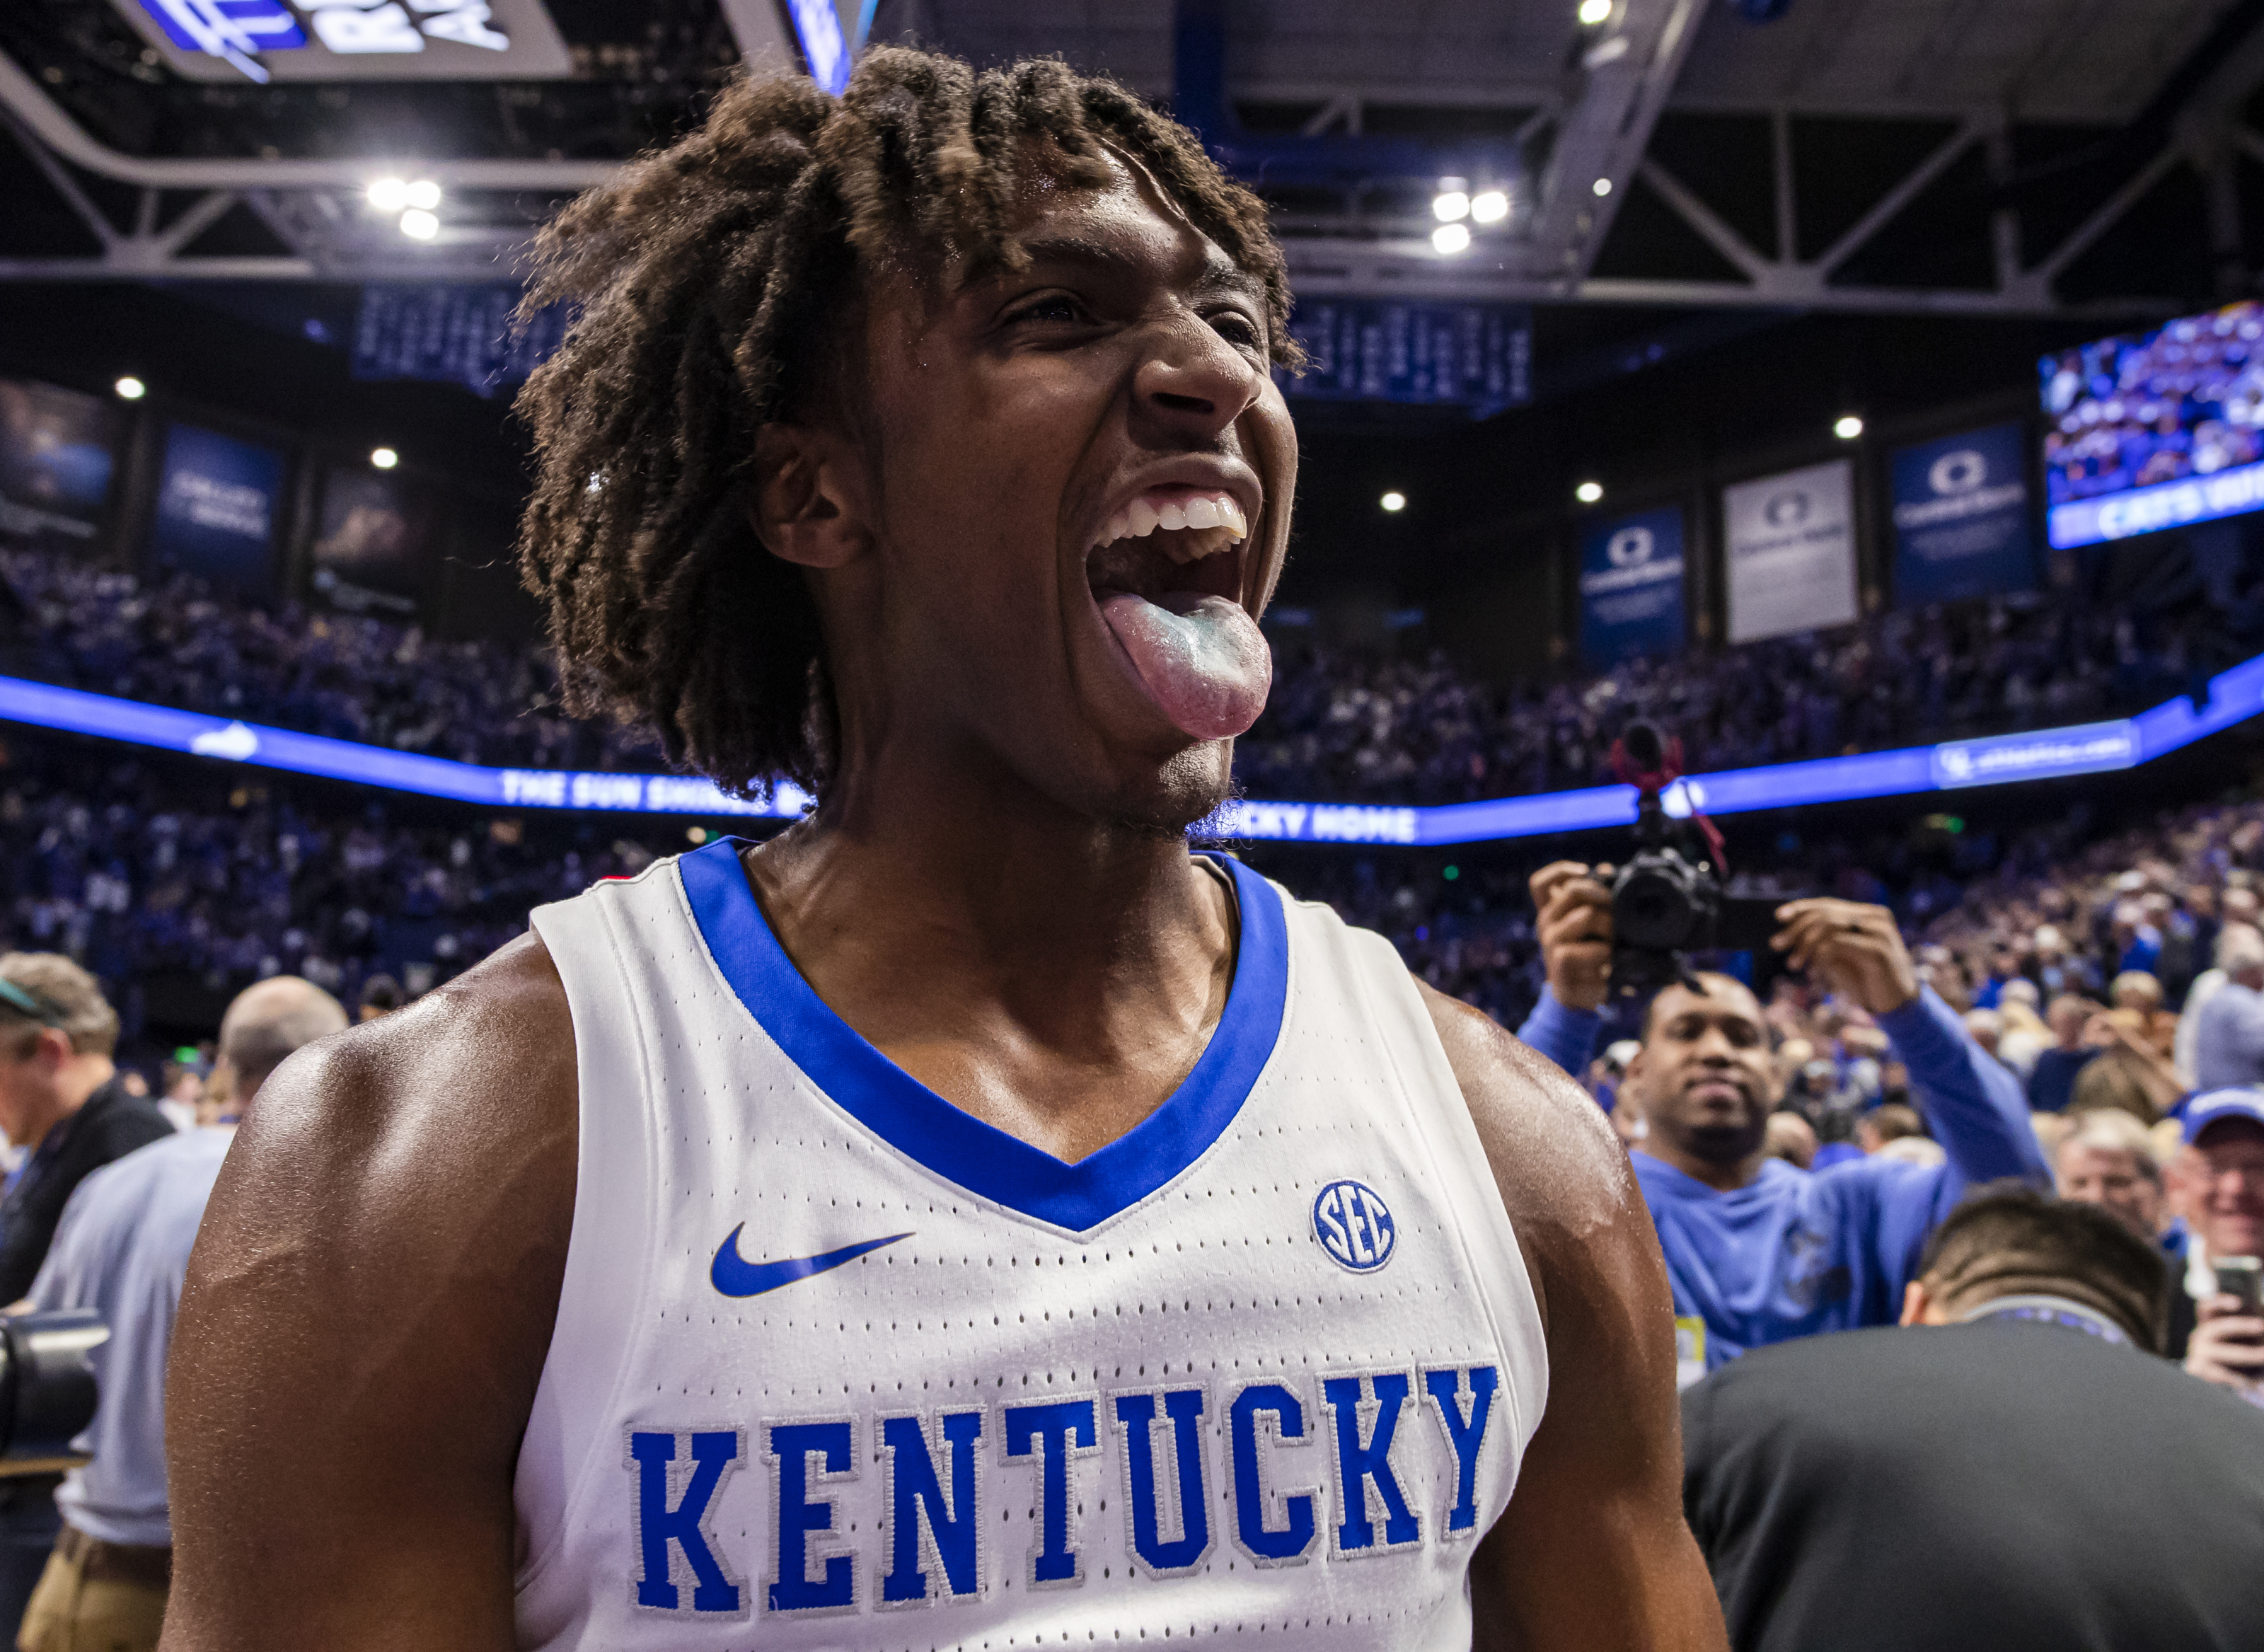 Sixers Playoff Bell Ringer: Tyrese Maxey fell to 21st in the draft